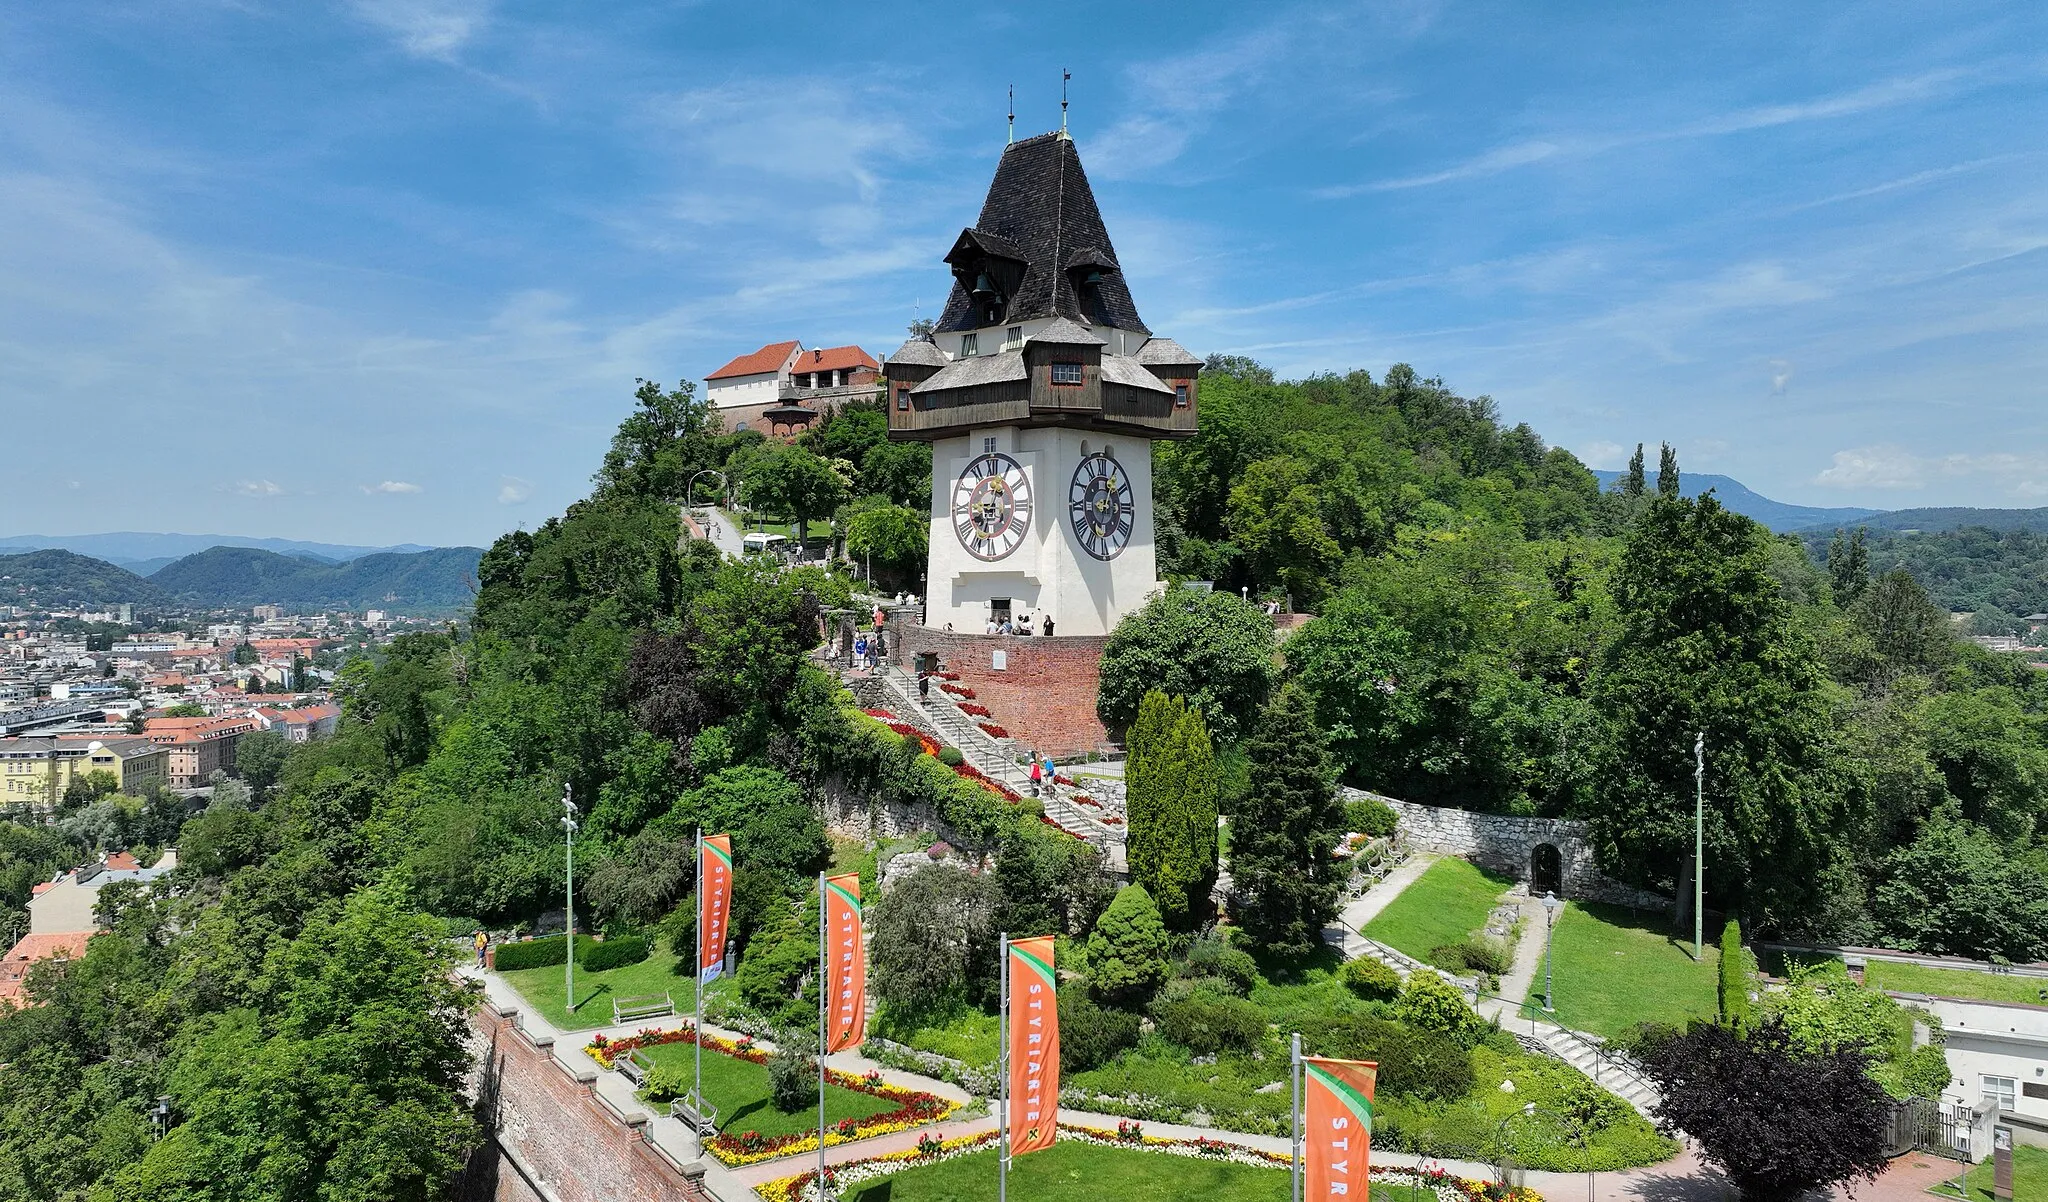 Photo showing: South view of the clock tower in Graz, Austria.